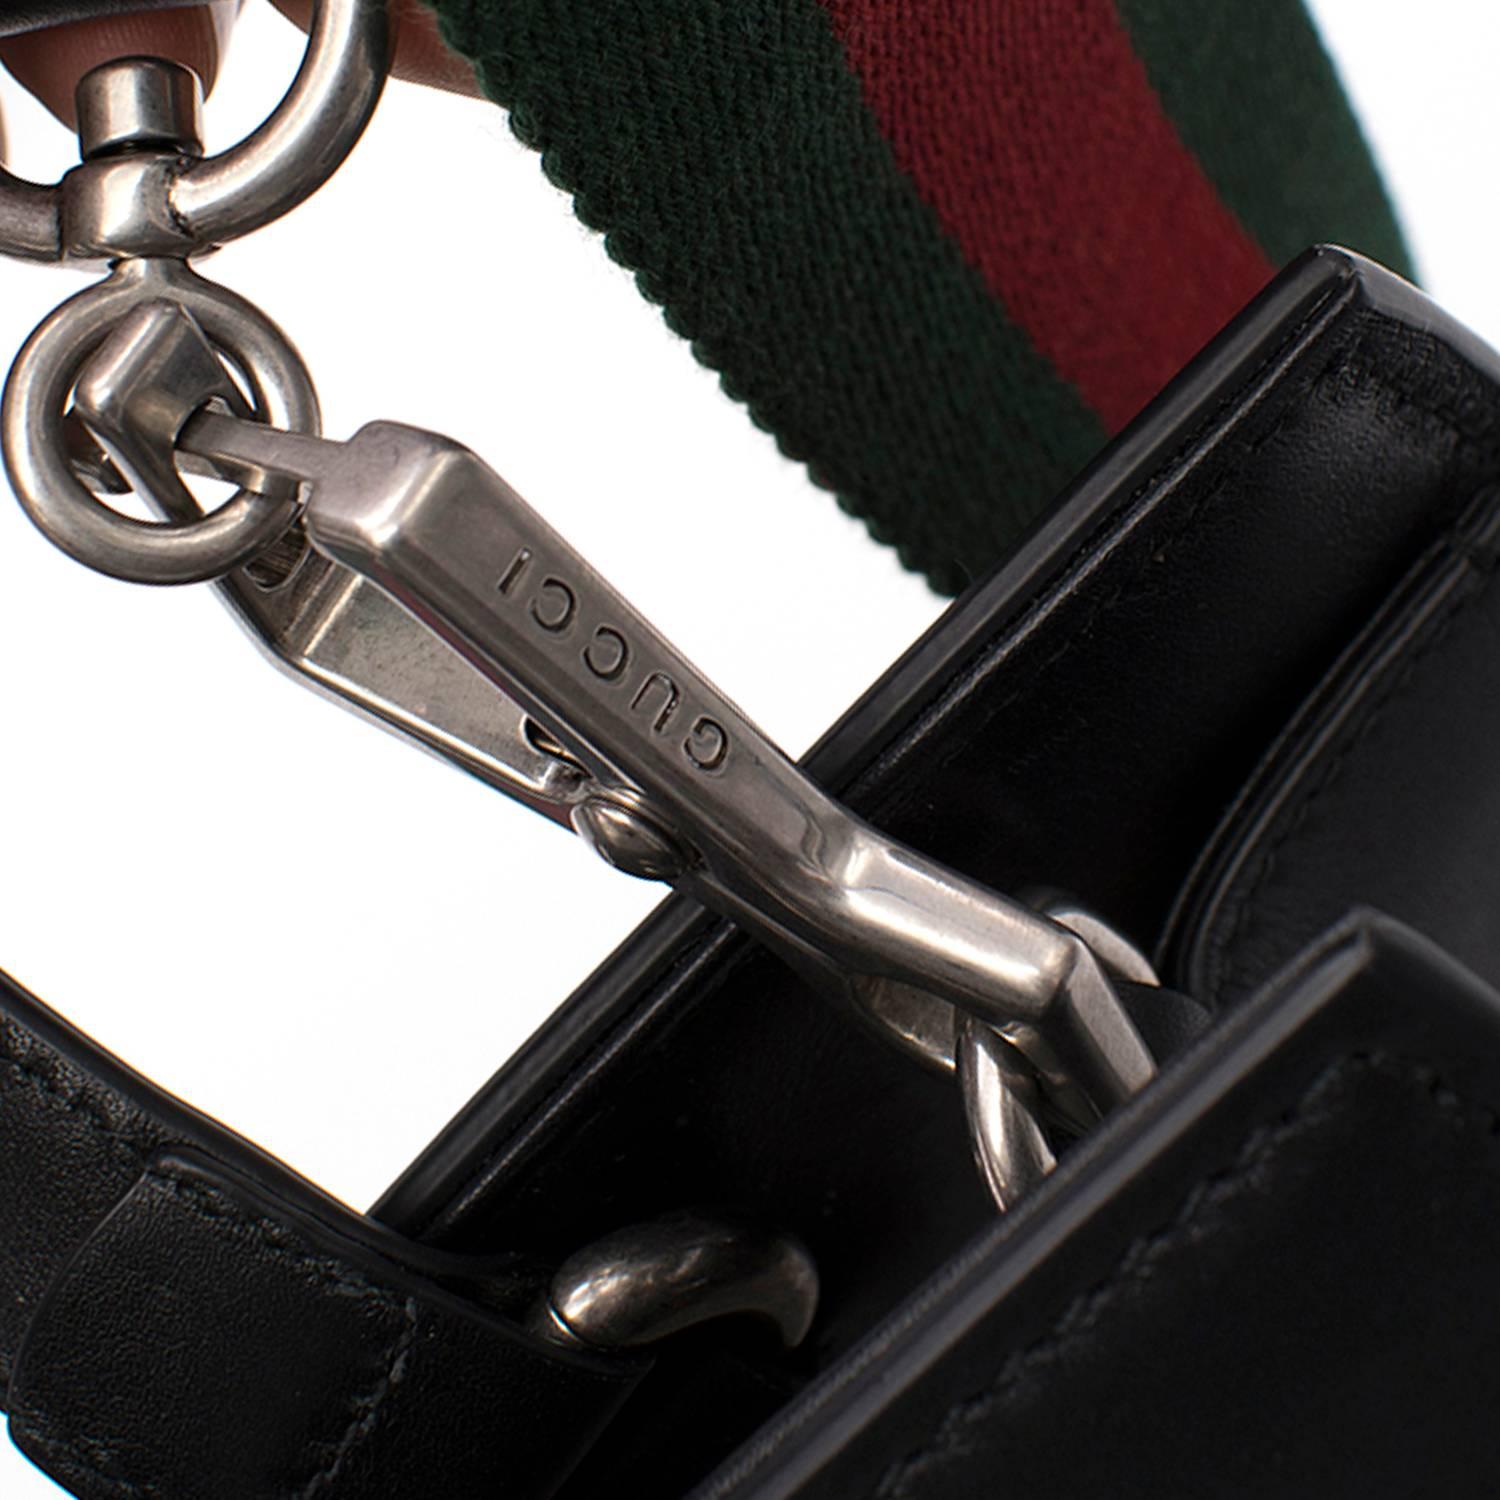 Gucci dionysus black leather top handle bag. 
Made in Italy. 

Top handle. 
Black leather with green/red Web.
Tiger head closure.
Cotton linen lining. 
Features a detachable shoulder strap. 
Interior: Zipped compartment and two card slots. 

Fabric: